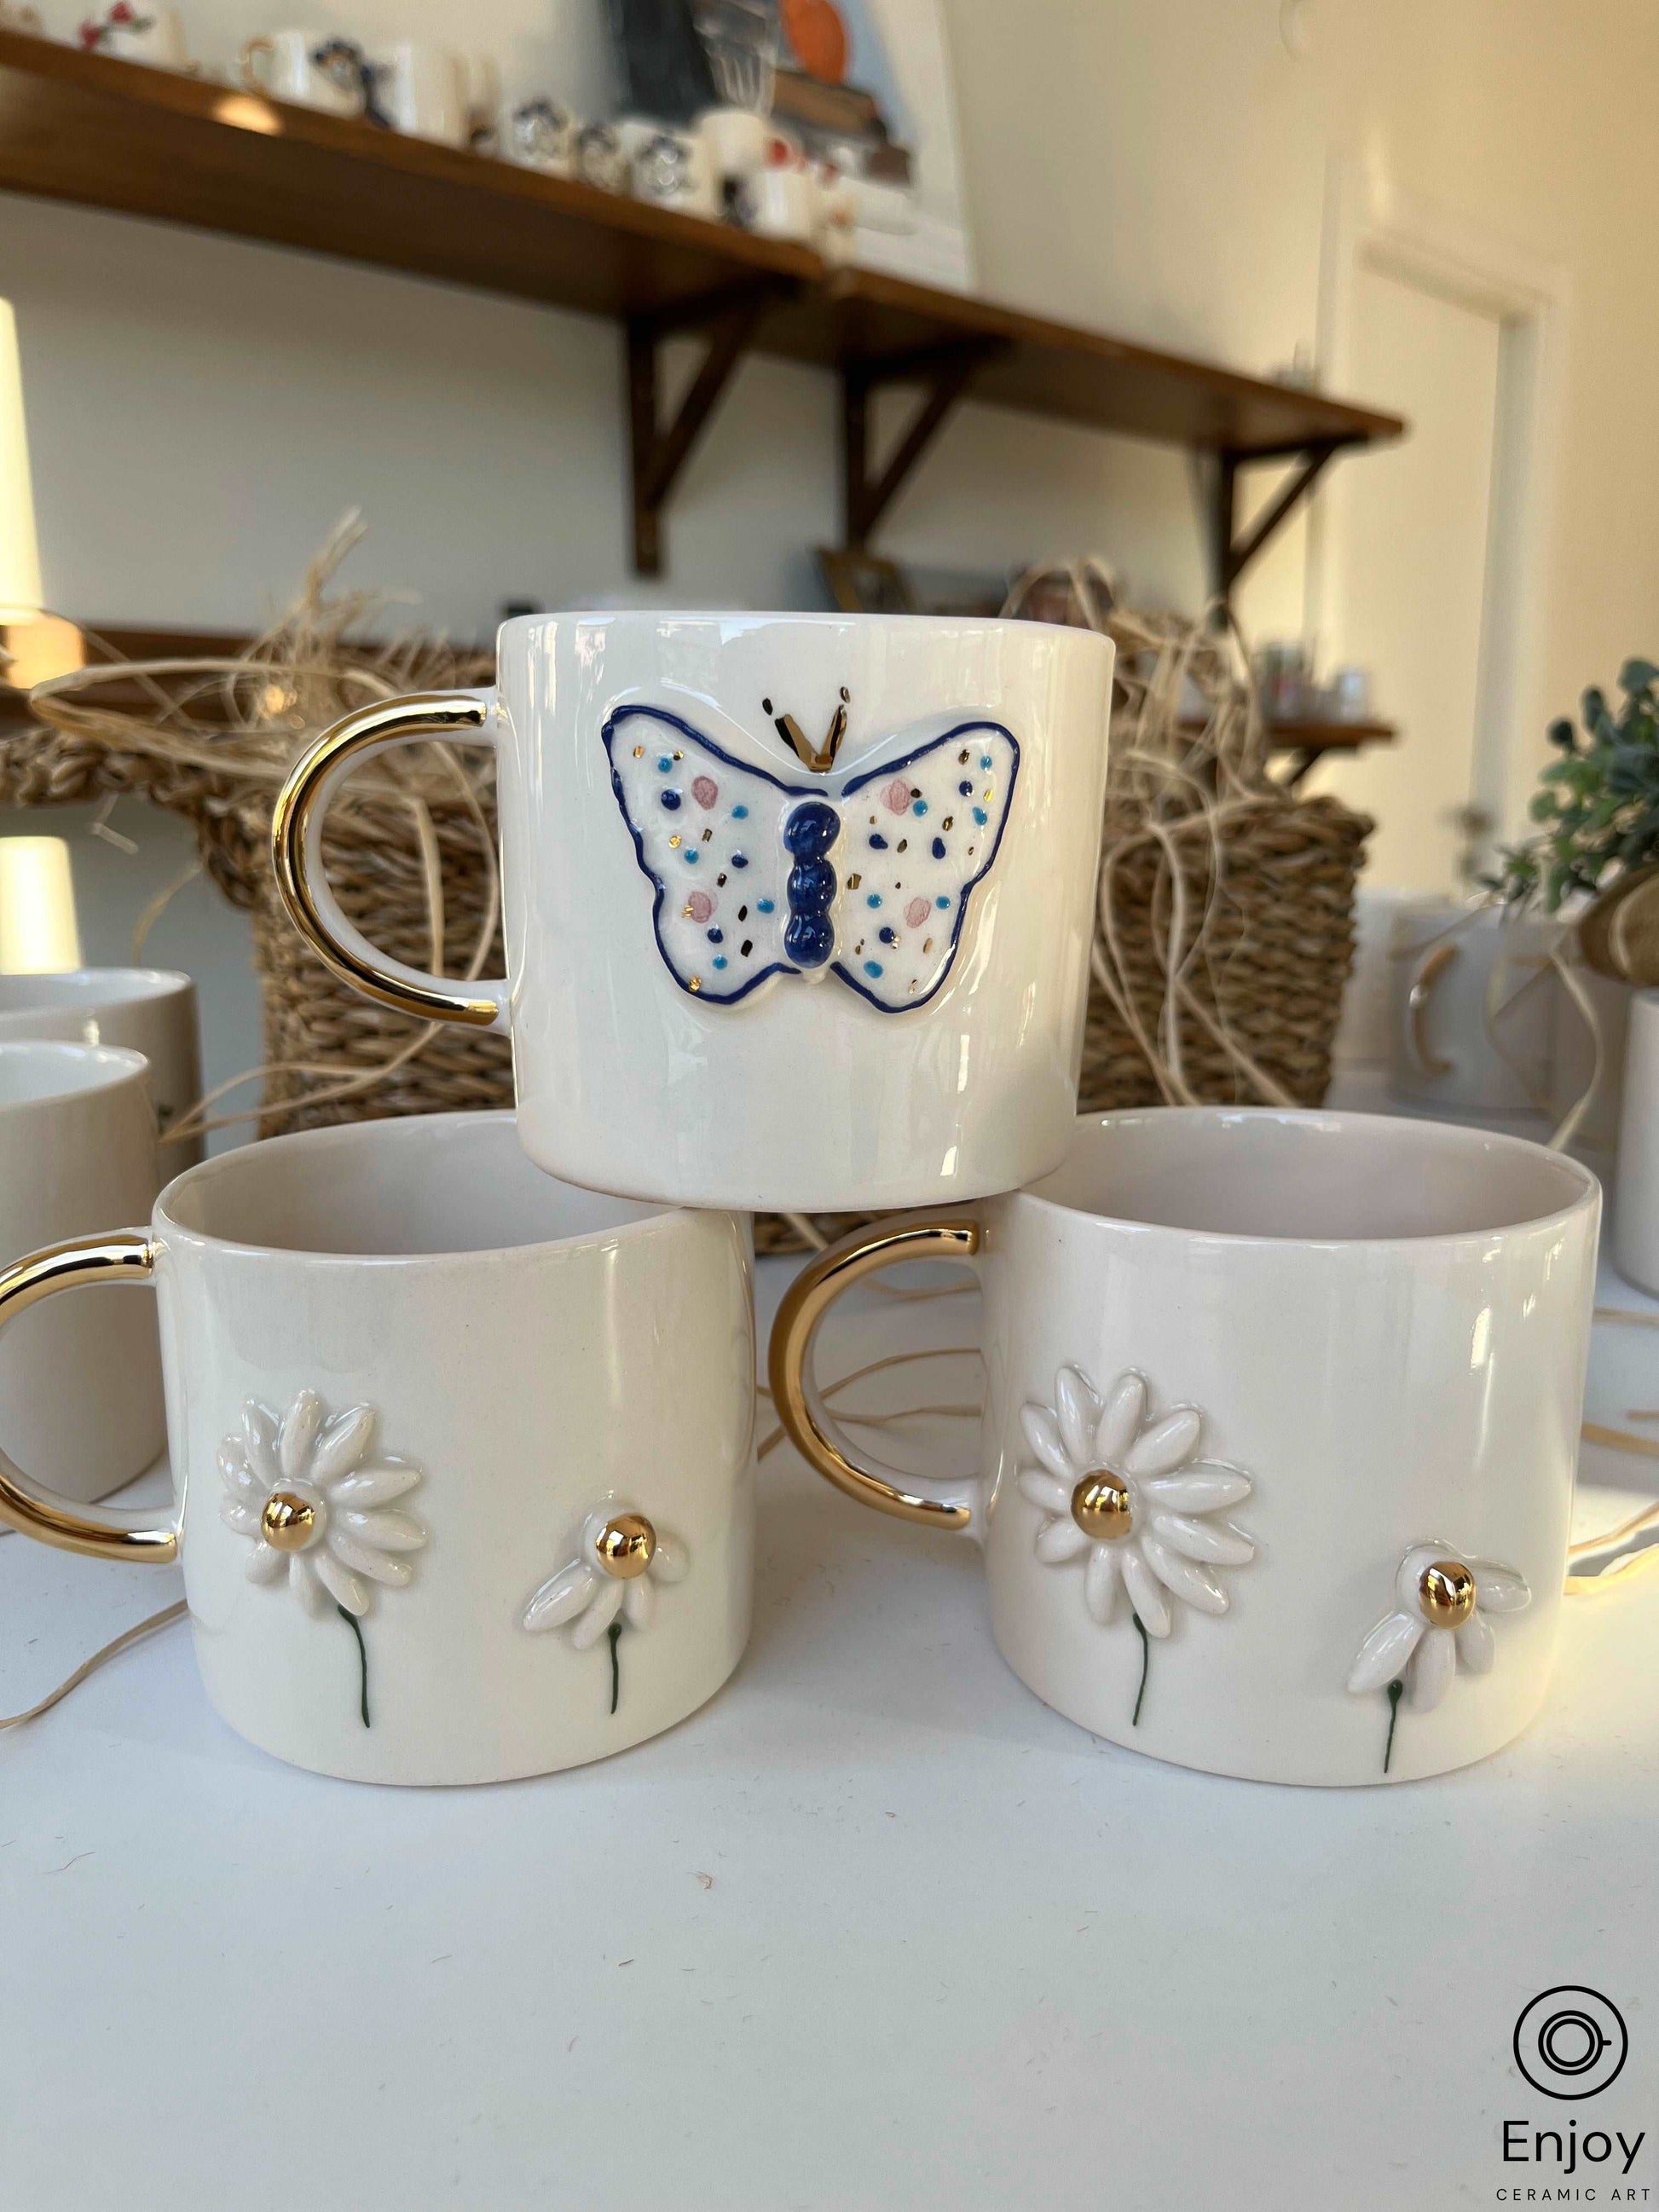 Three white ceramic mugs with golden handles, one with a blue butterfly, others with embossed daisies, against a straw basket backdrop.